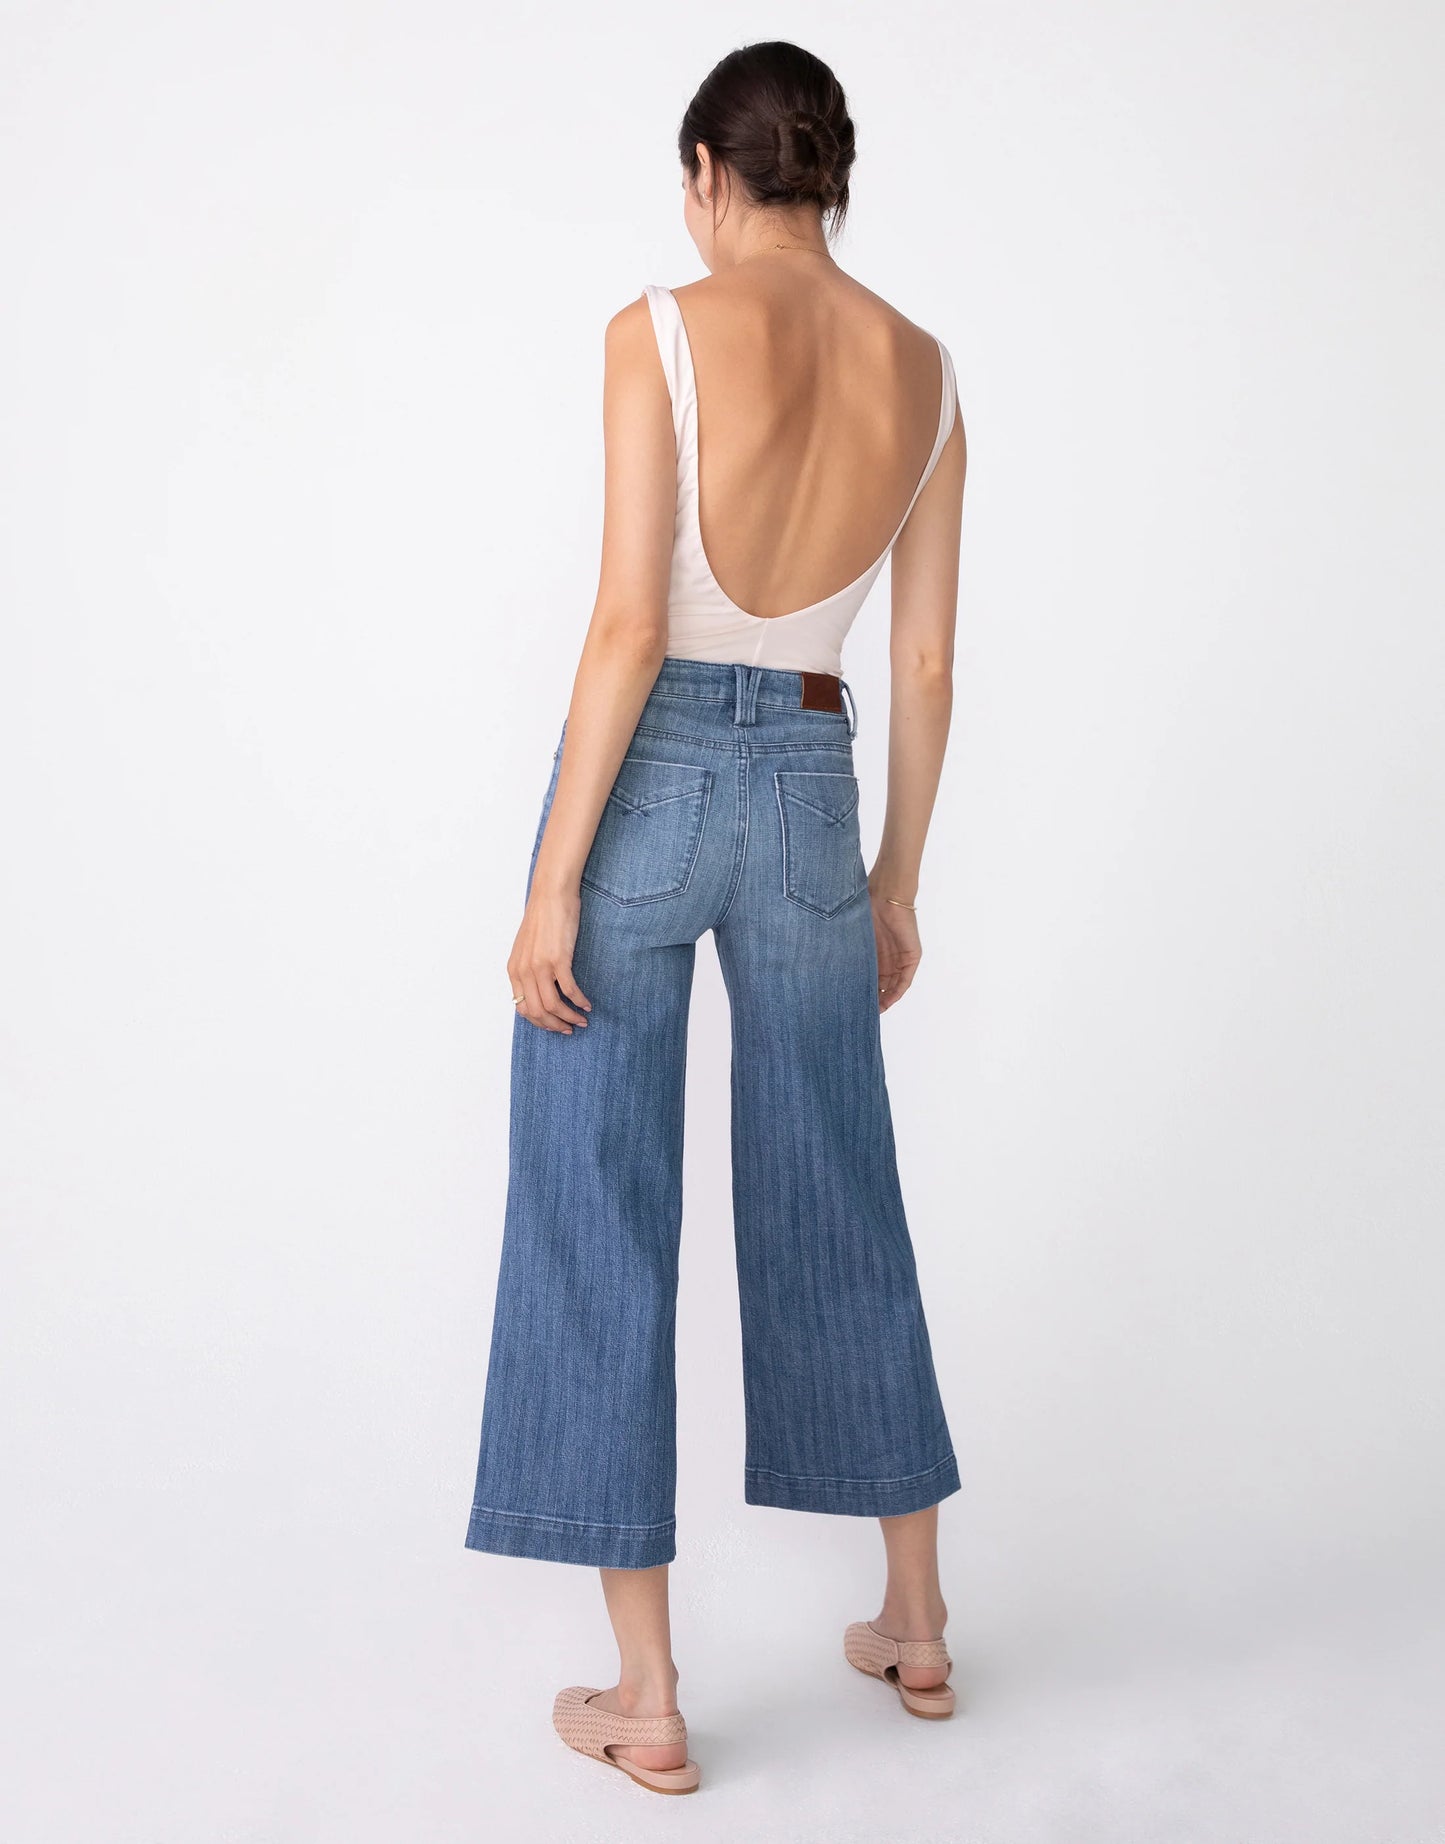 GRETA High Waist Culotte in Chevy by UnPublished